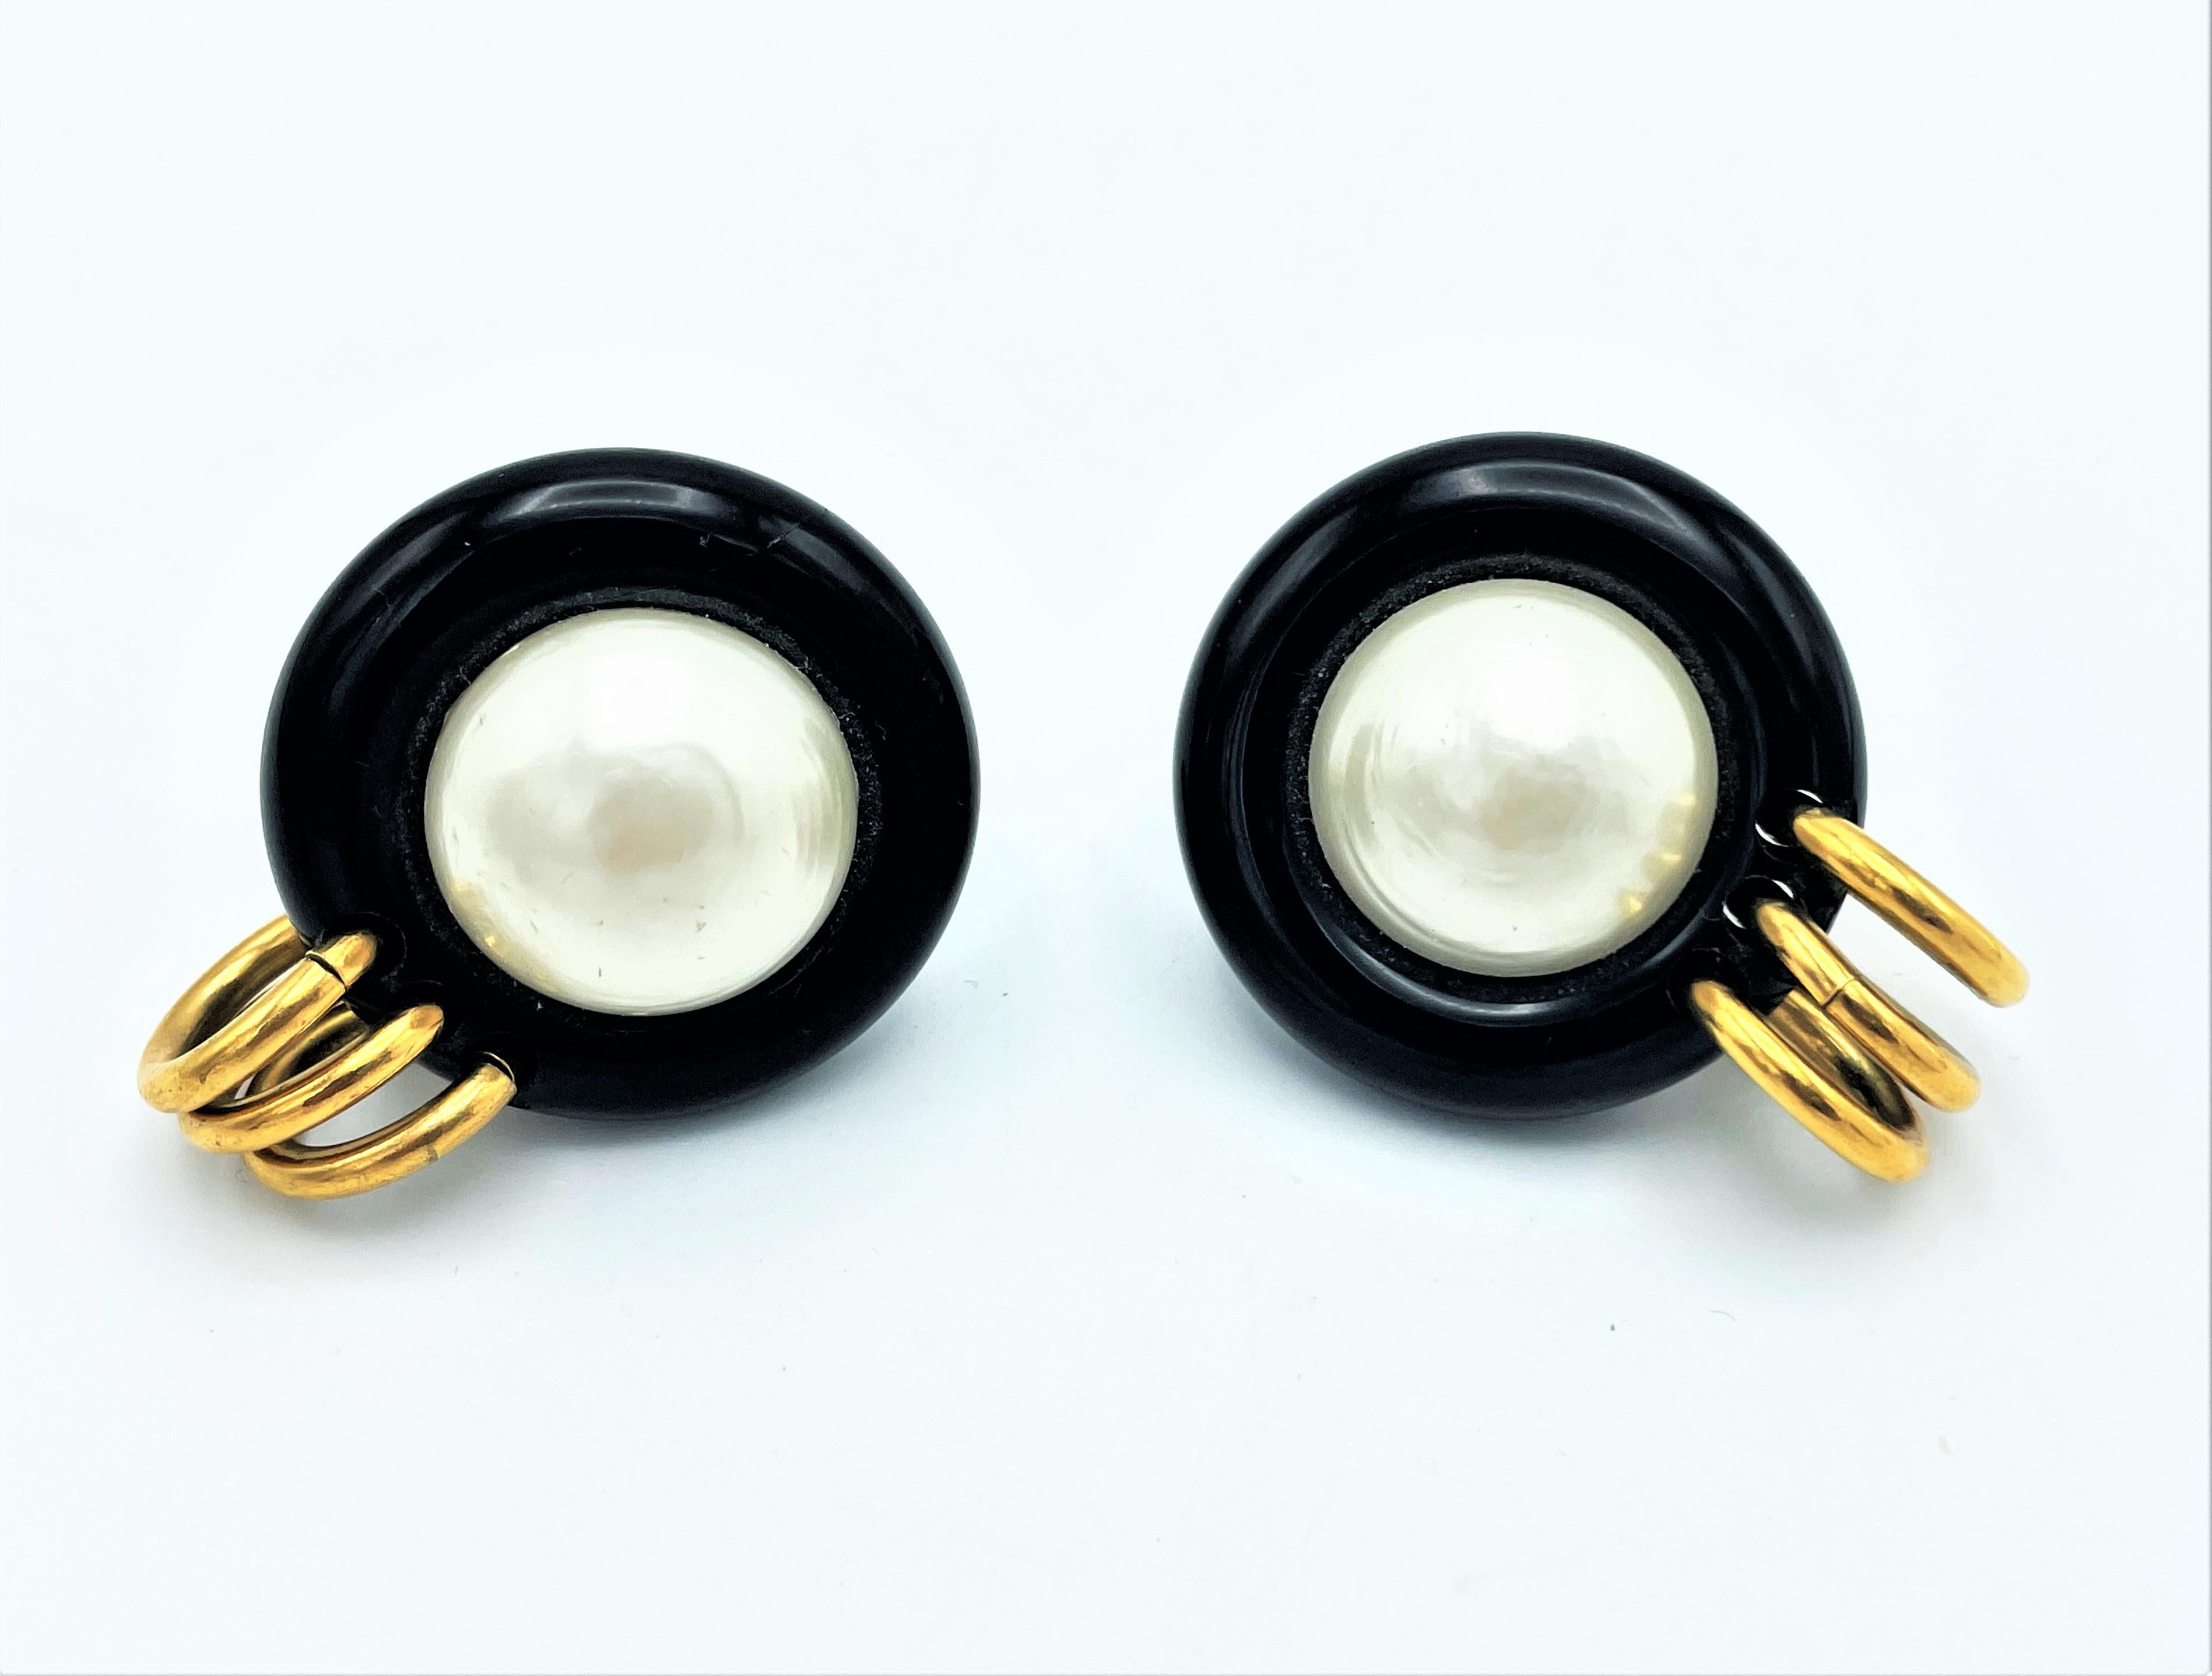 About
Large round black plastic ear clip threaded with a large handmade pearl and three gold rings. Designed by Victoire Castellane for Chanel in the 1990s
Measurement
Diameter 1,5 inches ( 4 cm)
Pearl size 1 inches   ( 2,3 cm)
Deep  0,71 inches 